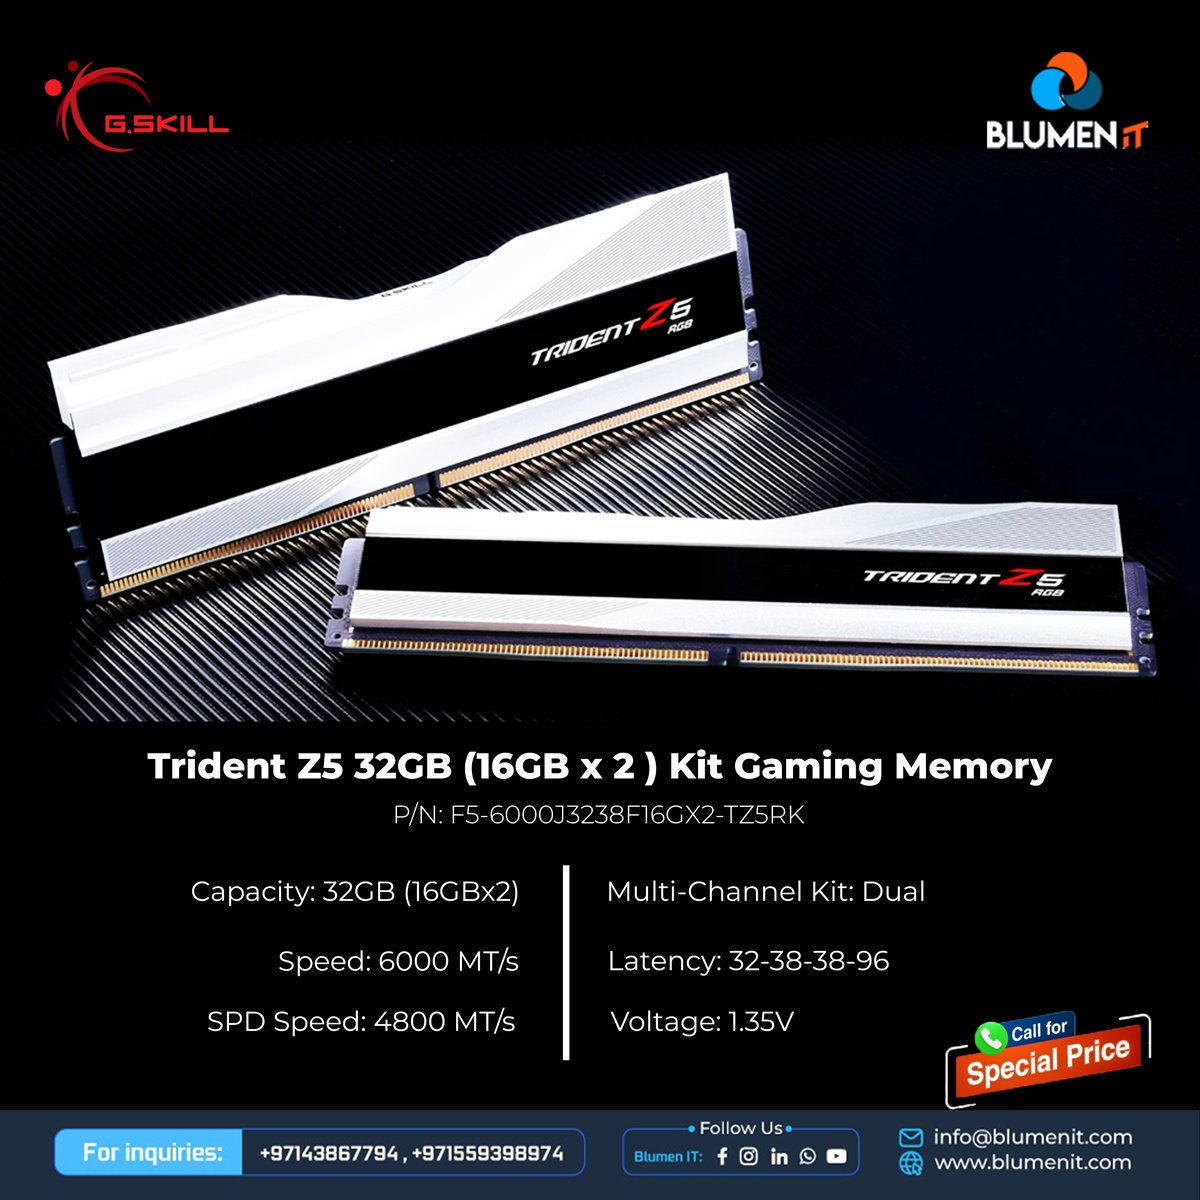 #computer #computeraccessories #Intel #Processor #ssd #dubaigamers #uaegamers #TOPGAMES #topgamers #high_speed_SSD #Quality #Speed #crucial #memory #DDR5